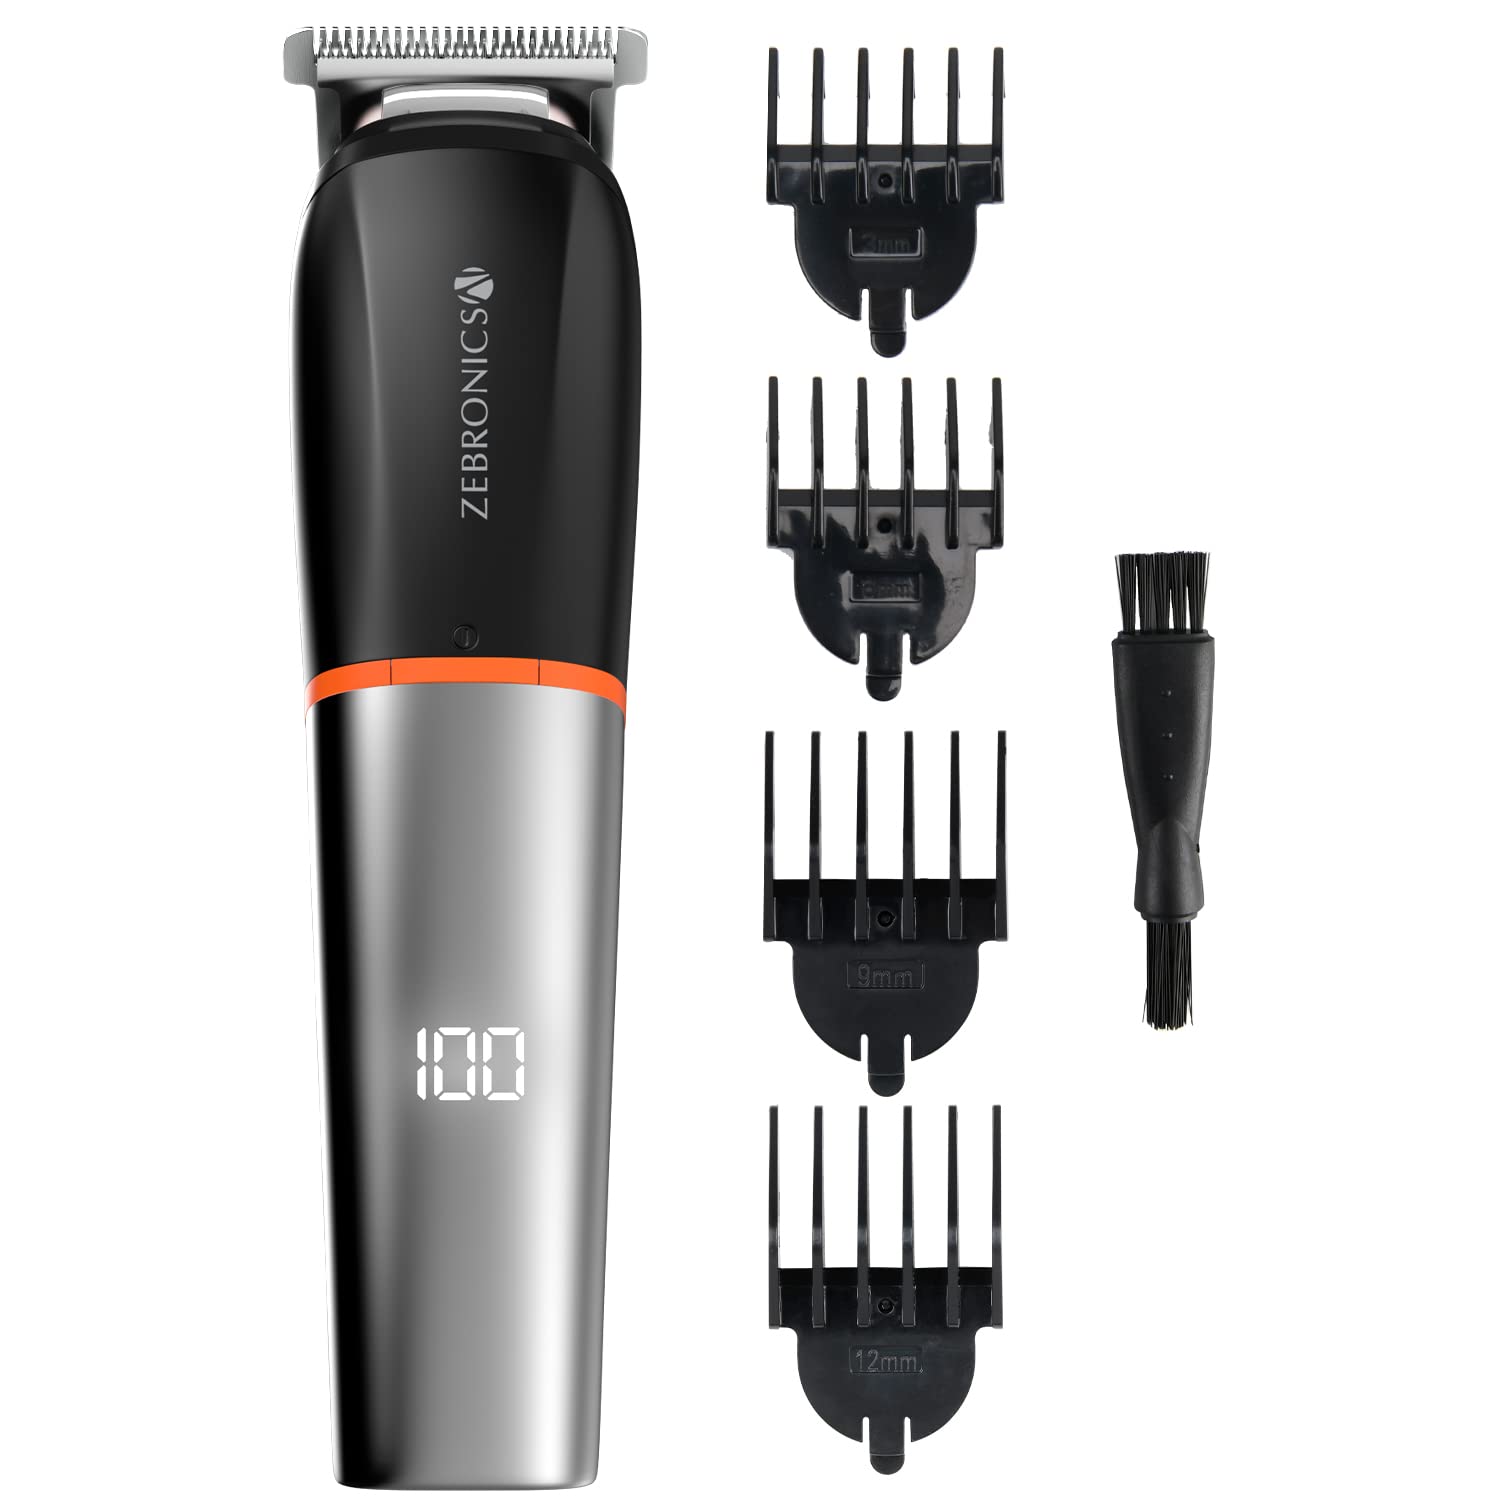 Zebronics ZEB-HT105 Corded/Cordless Use Trimmer with up to 90 Mins USB Fast Charge, IPX6, LED Display, 2 Speed Modes, Rounded Tip Stainless Steel Blade, 4 Guide Combs & ABS (Black+Metallic Grey)-Trimmer-dealsplant